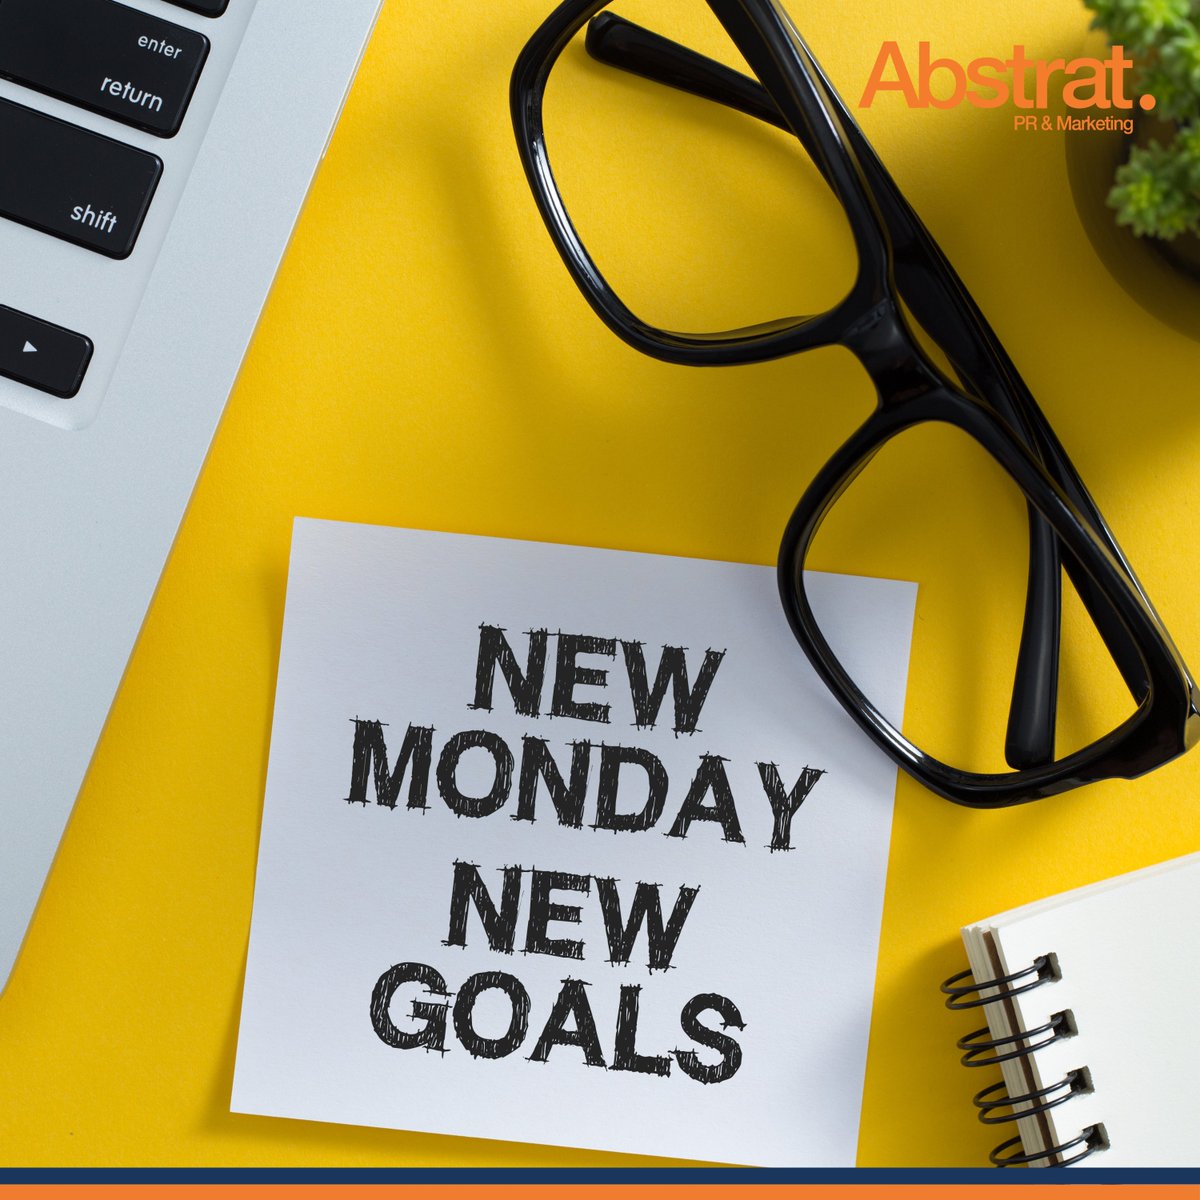 Confidence in your abilities is key to facing Monday's tasks head-on and tackling them with resilience, paving the way for a productive week ahead.

#monday #mondayvibes #abstrat #abstrattz